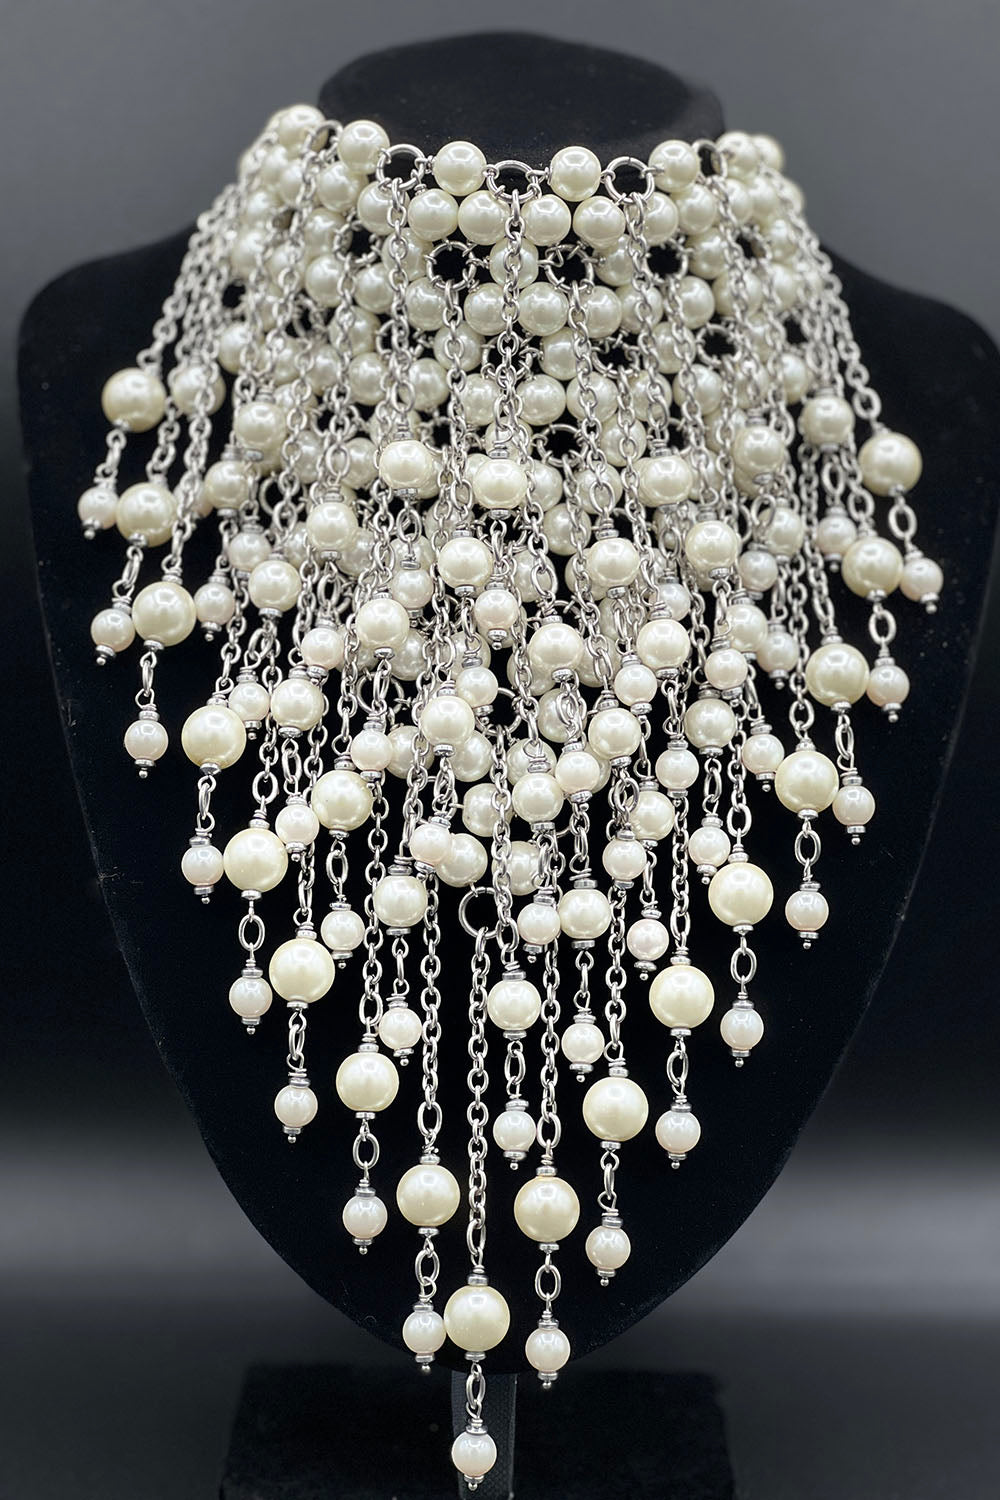 The Chaos of Pearls Neck Harness